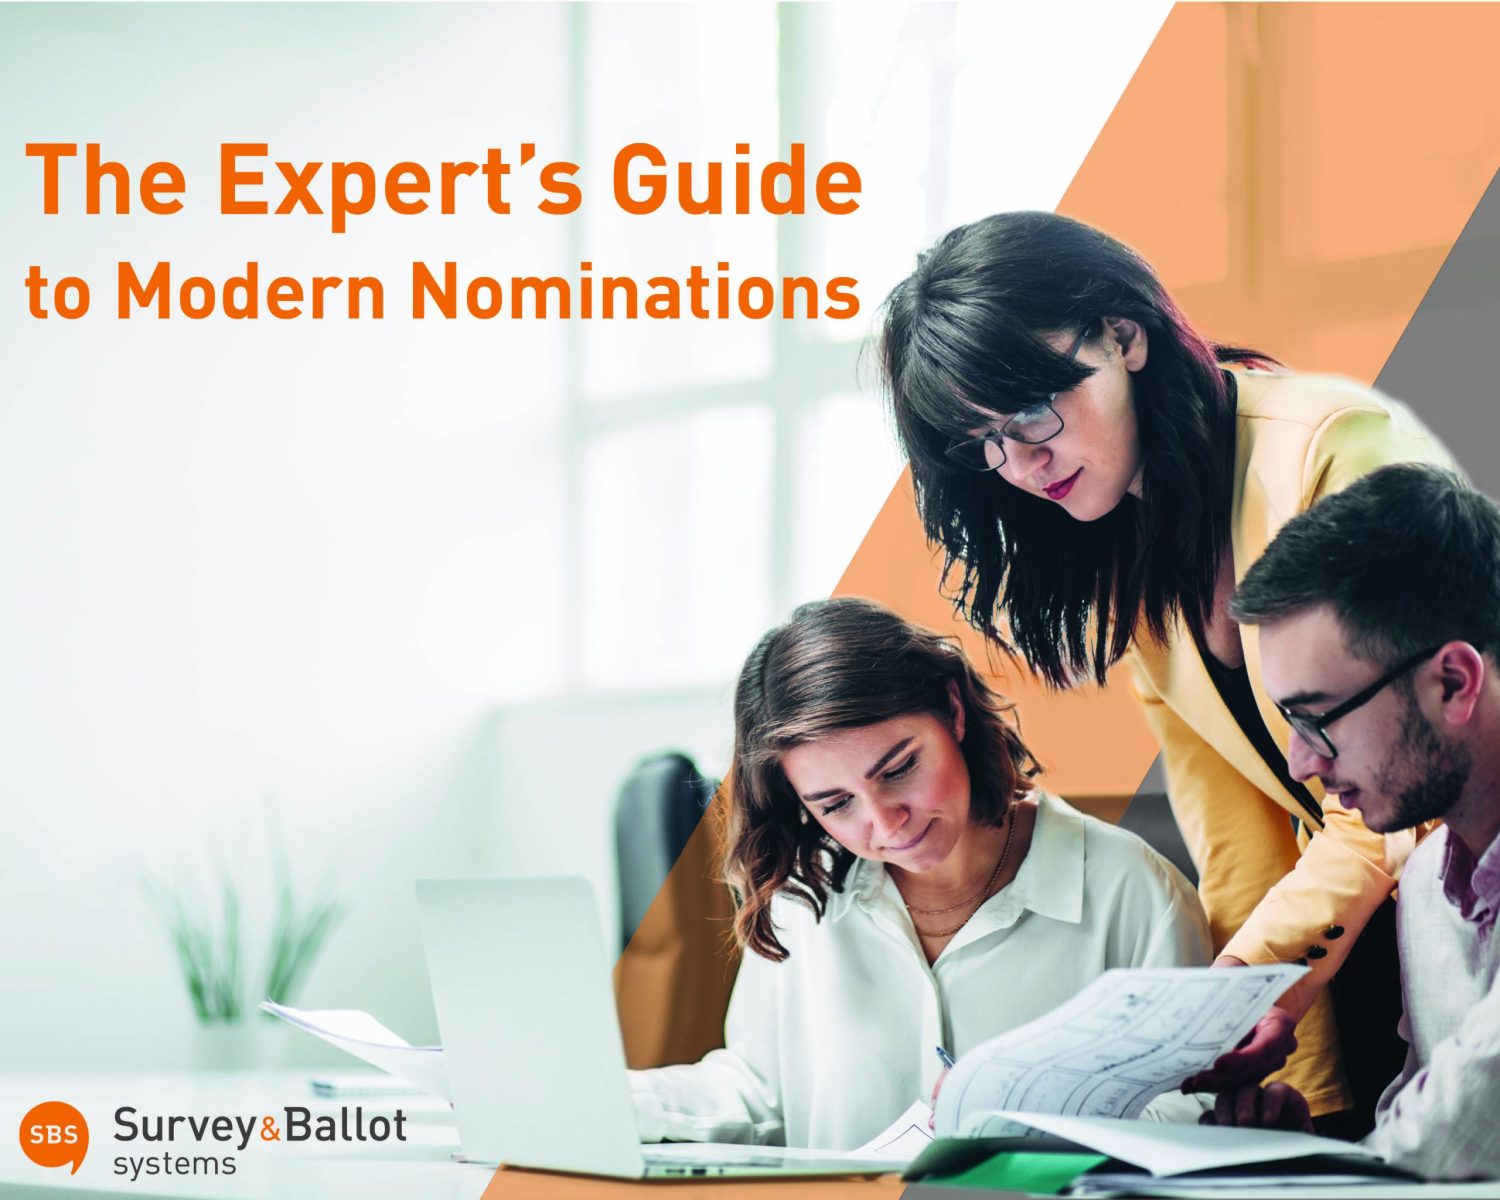 The Experts Guide to Modern Nominations eBook_Cover